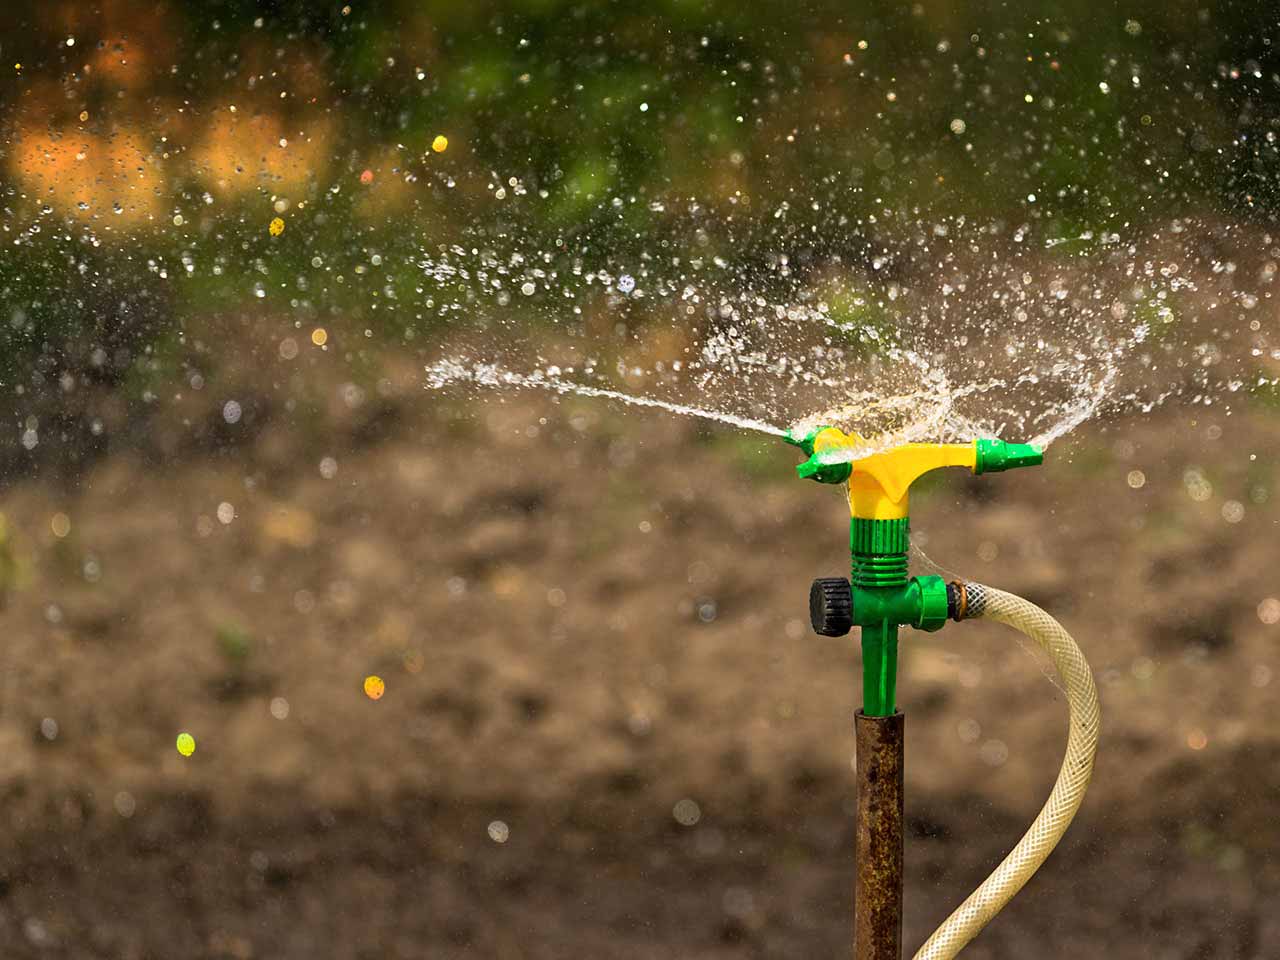 Plant irrigation system sprmnkling water over garden